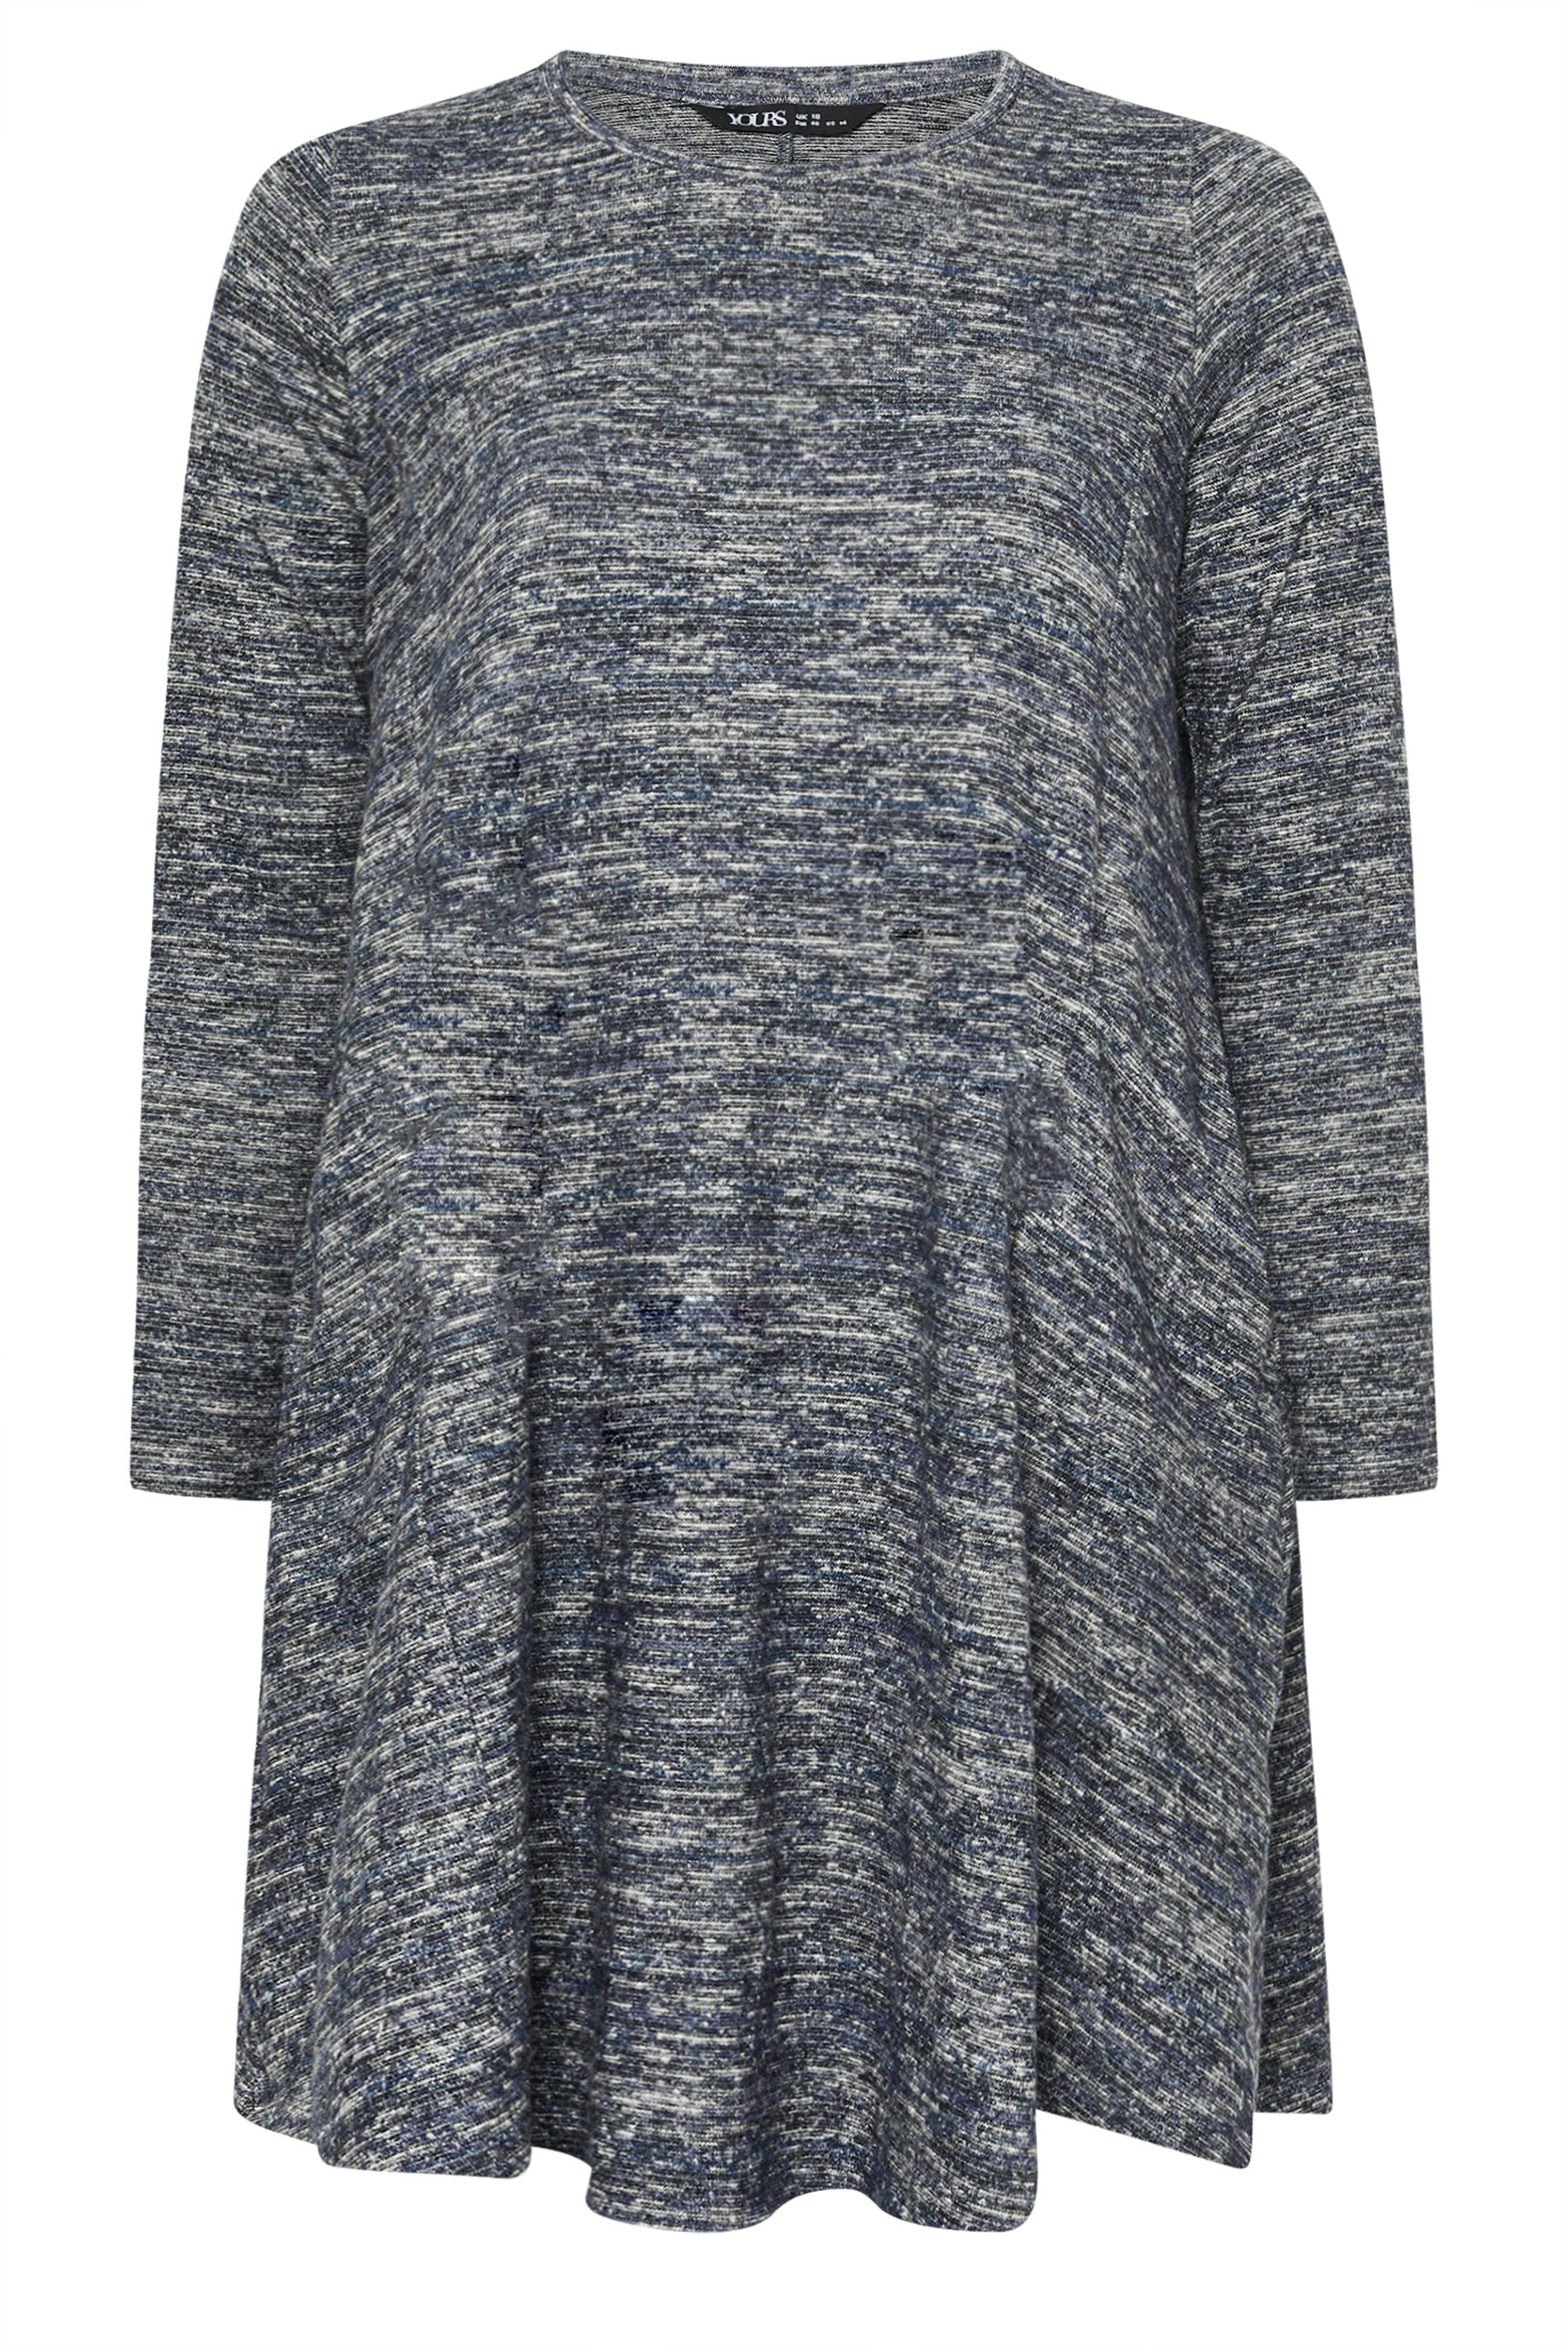 YOURS Plus Size Navy Blue Marl Soft Touch Pocket Dress | Yours Clothing